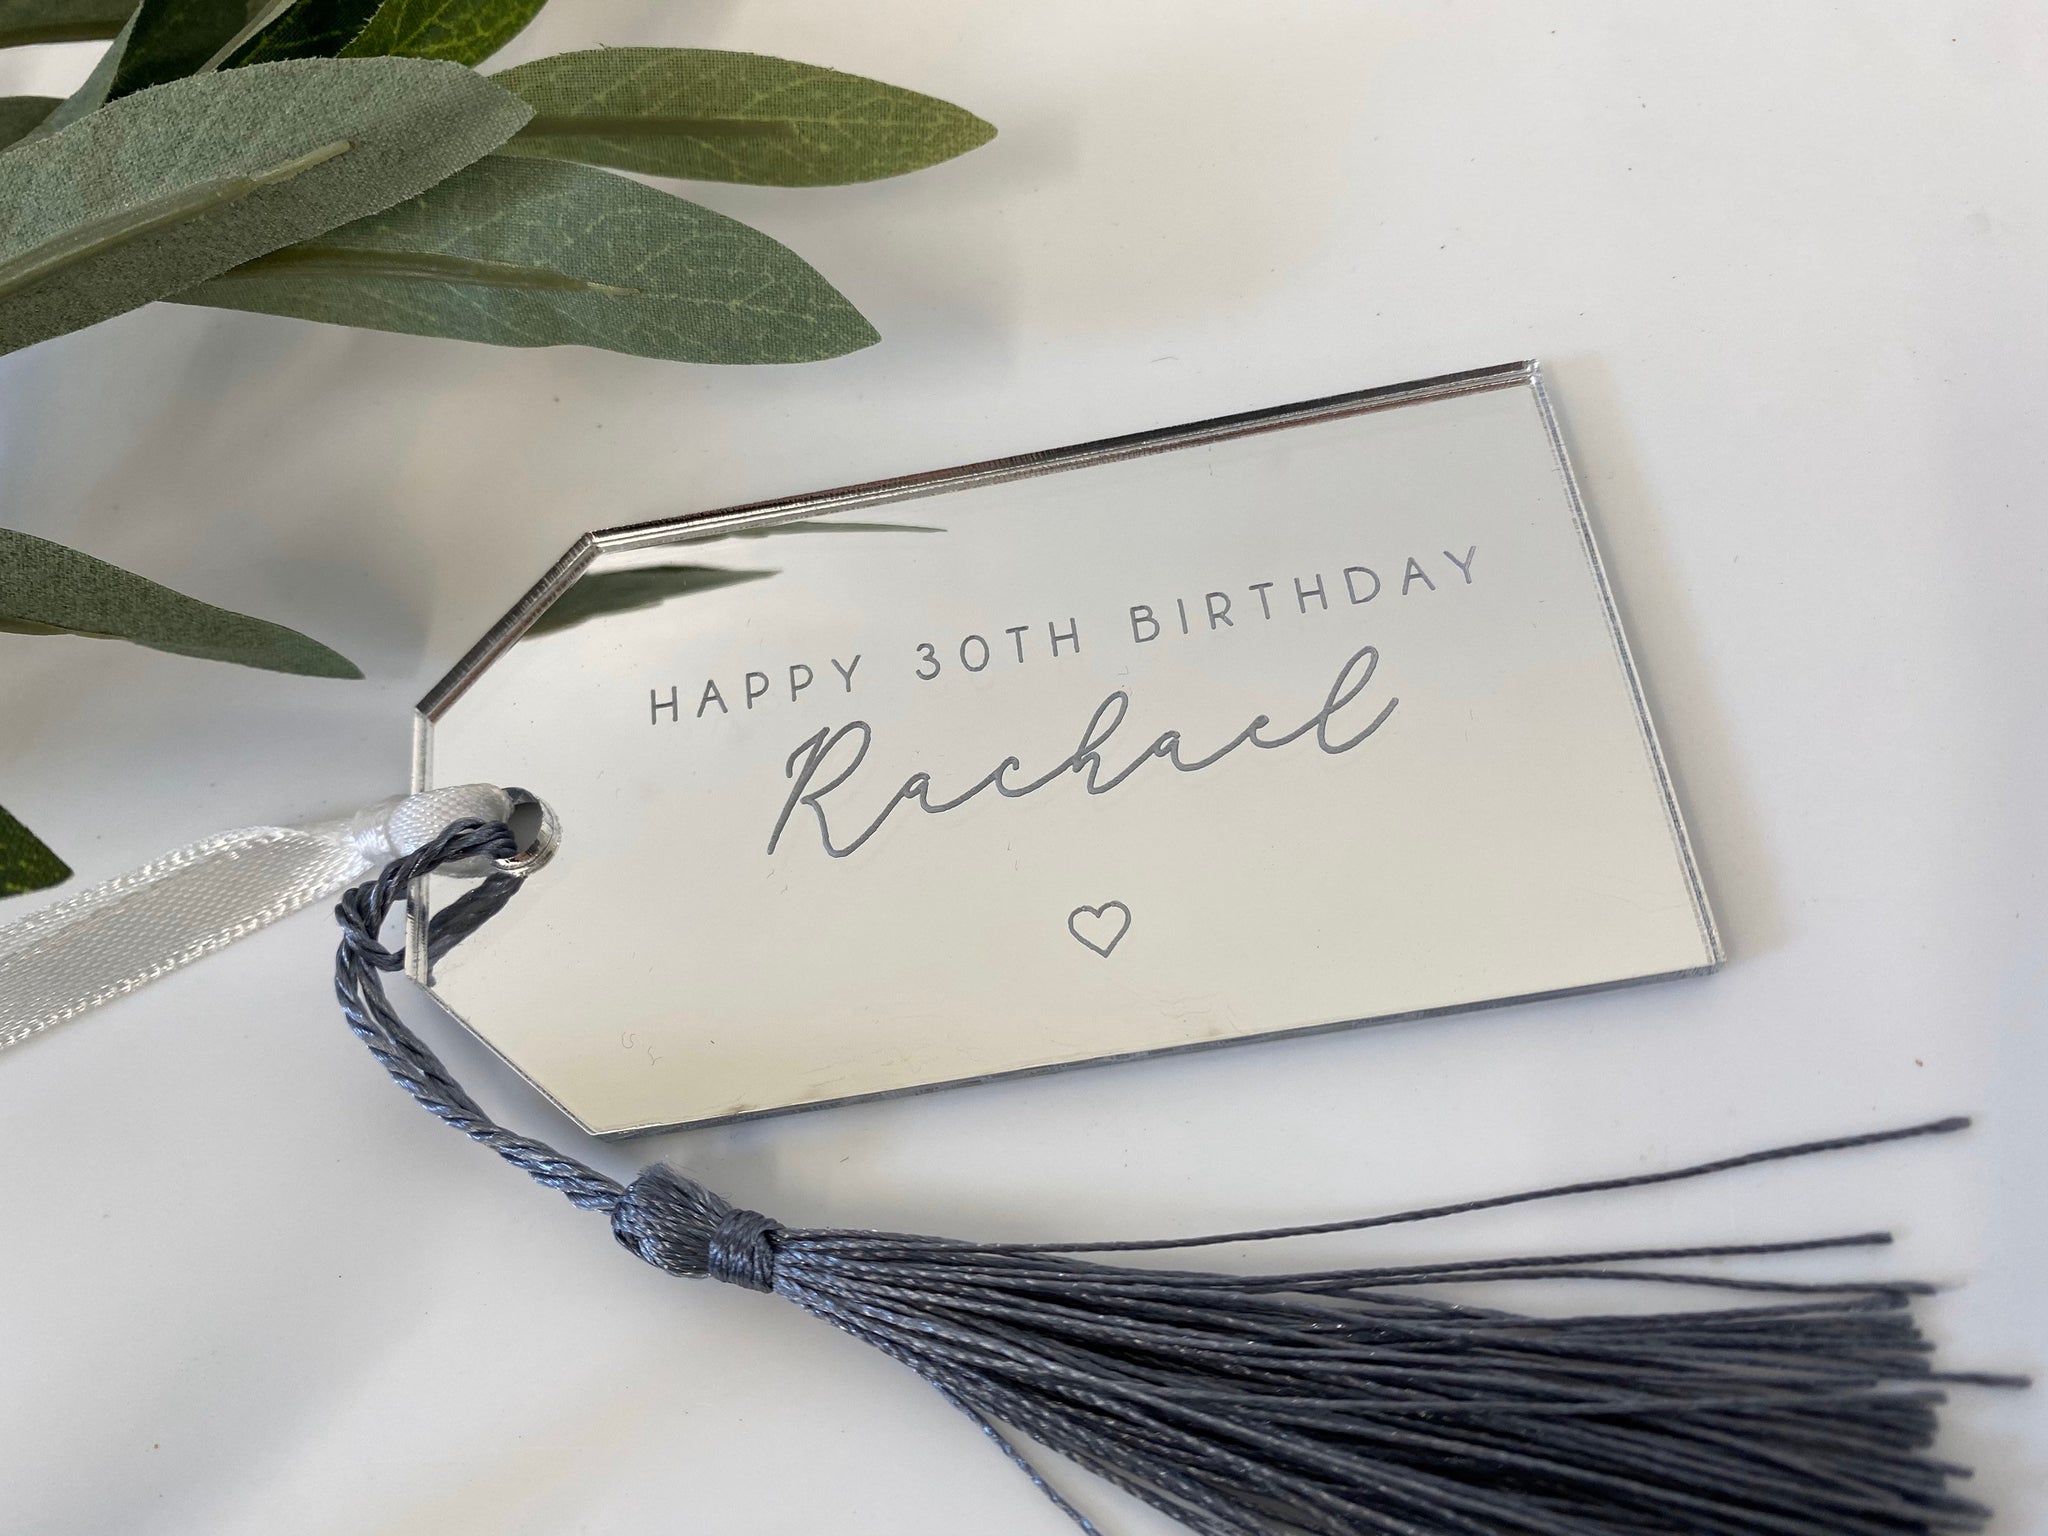 Personalised deluxe engraved mirrored acrylic gift tag